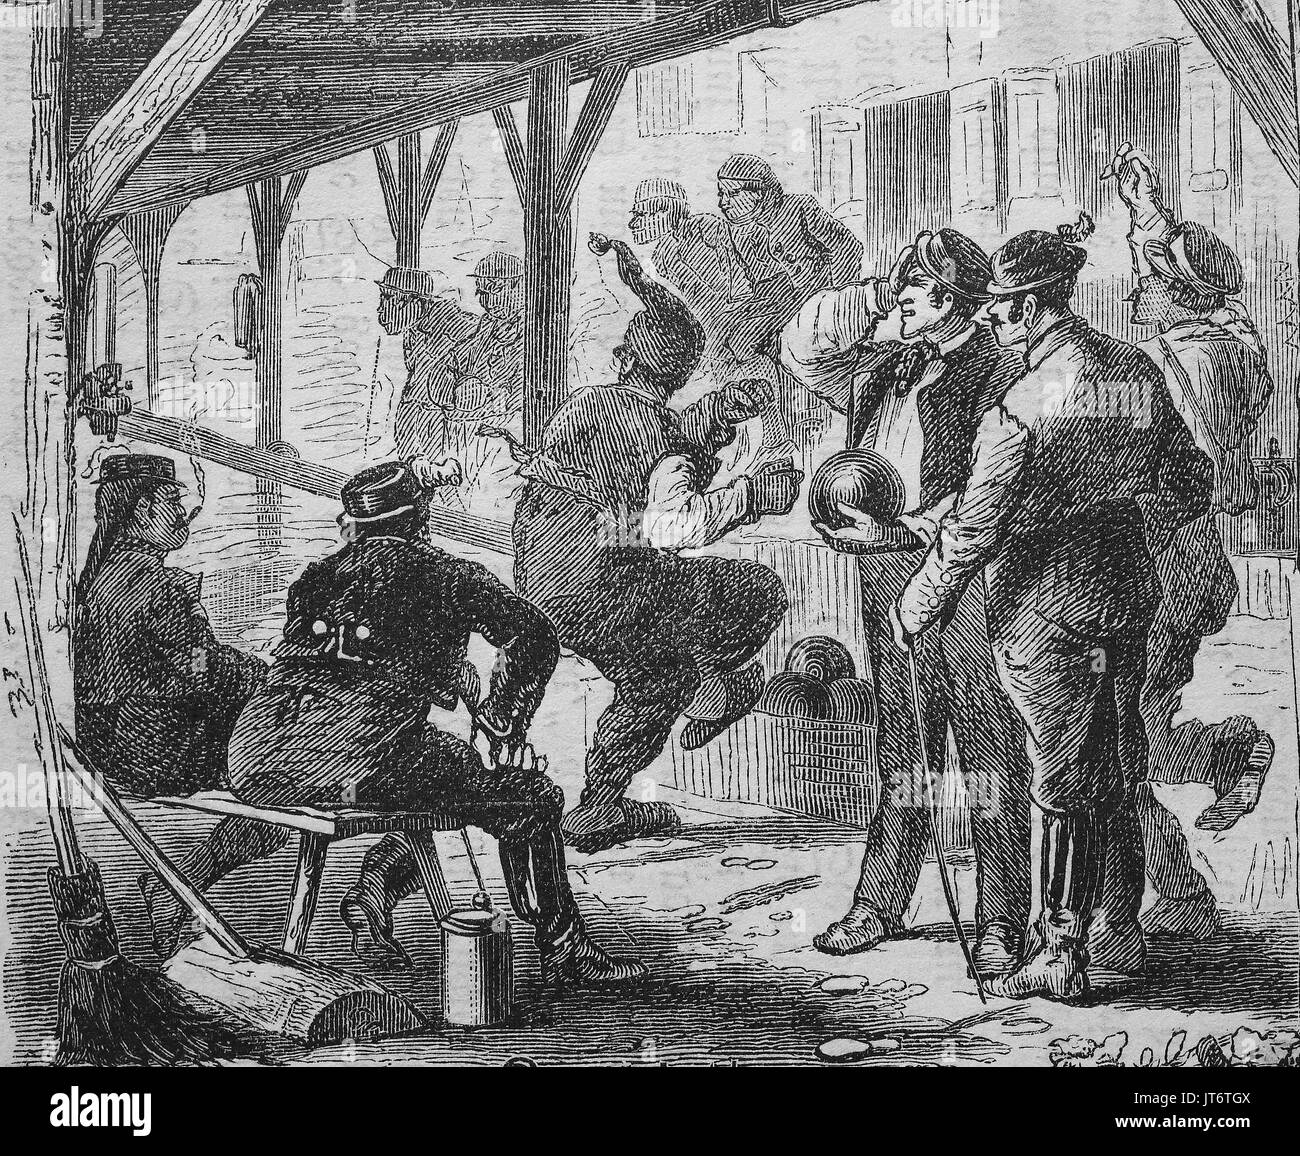 Kermesse, kermis, kirmess, Kirchweih festival in upper Bavaria, Germany, The bowling alley, Digital improved reproduction of an image published between 1880 - 1885 Stock Photo